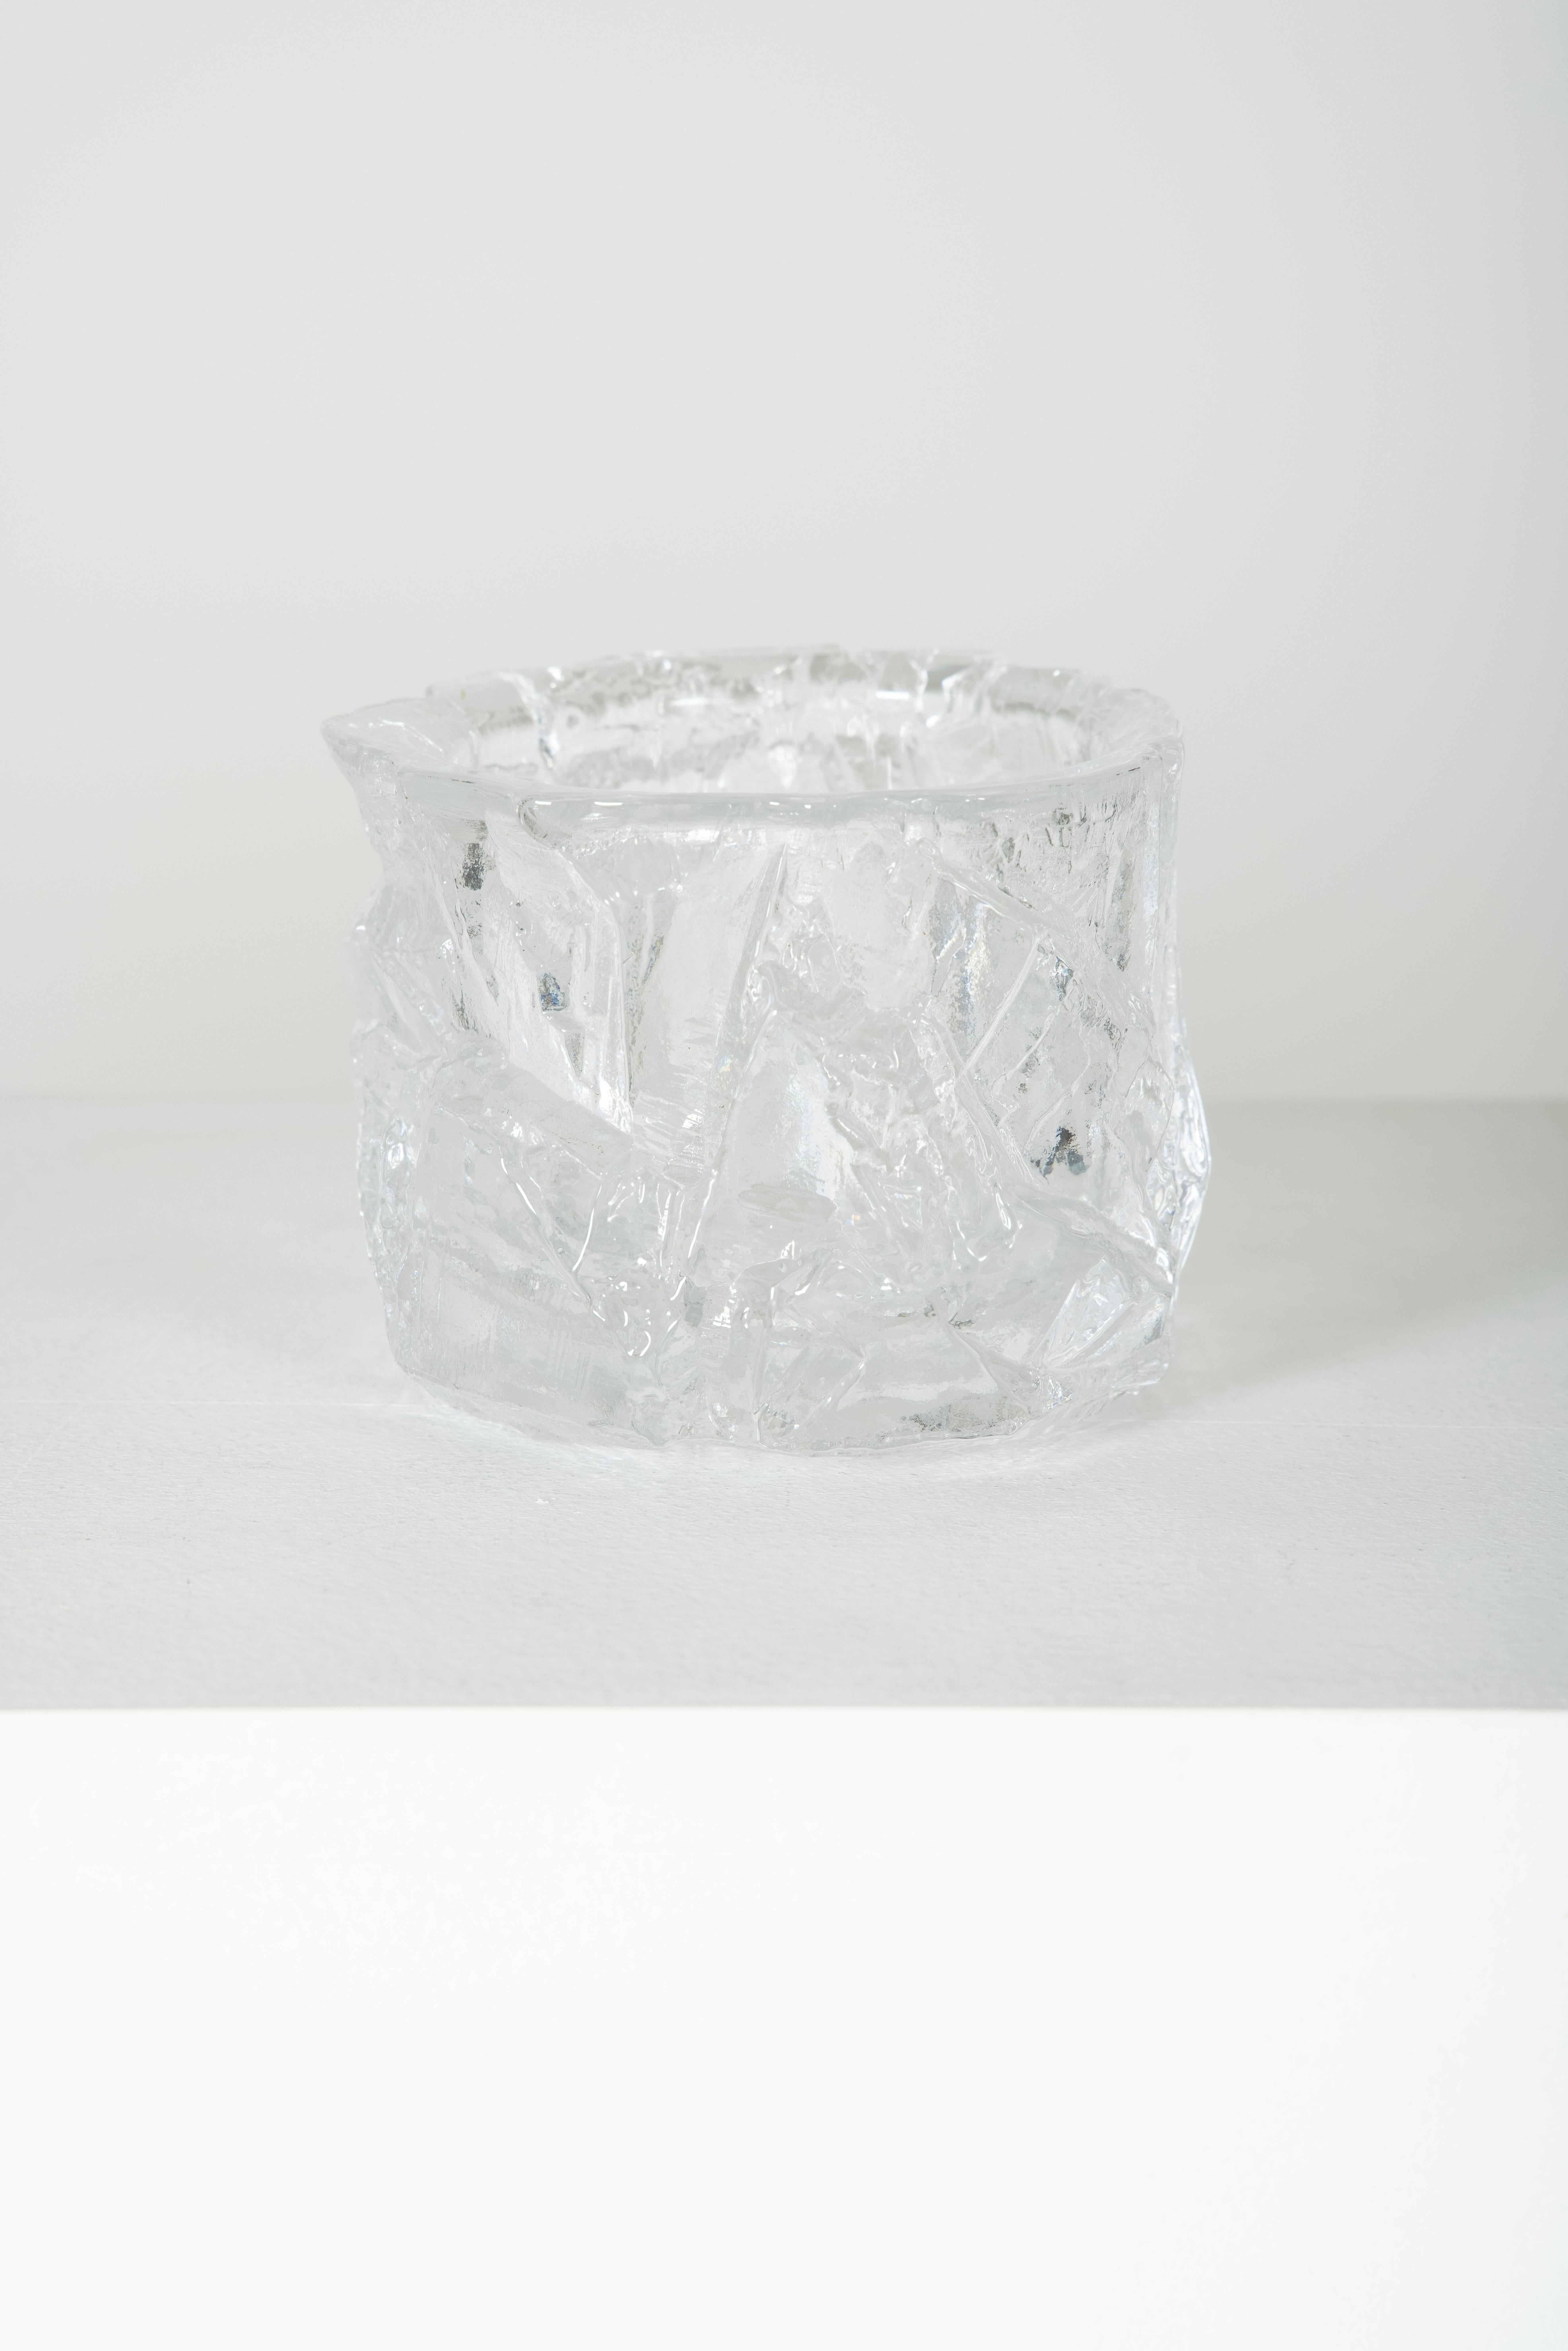 Ice crystals effect trinket bowl in Daum's crystal, France. Excellent condition, no shine. Signed on the side.